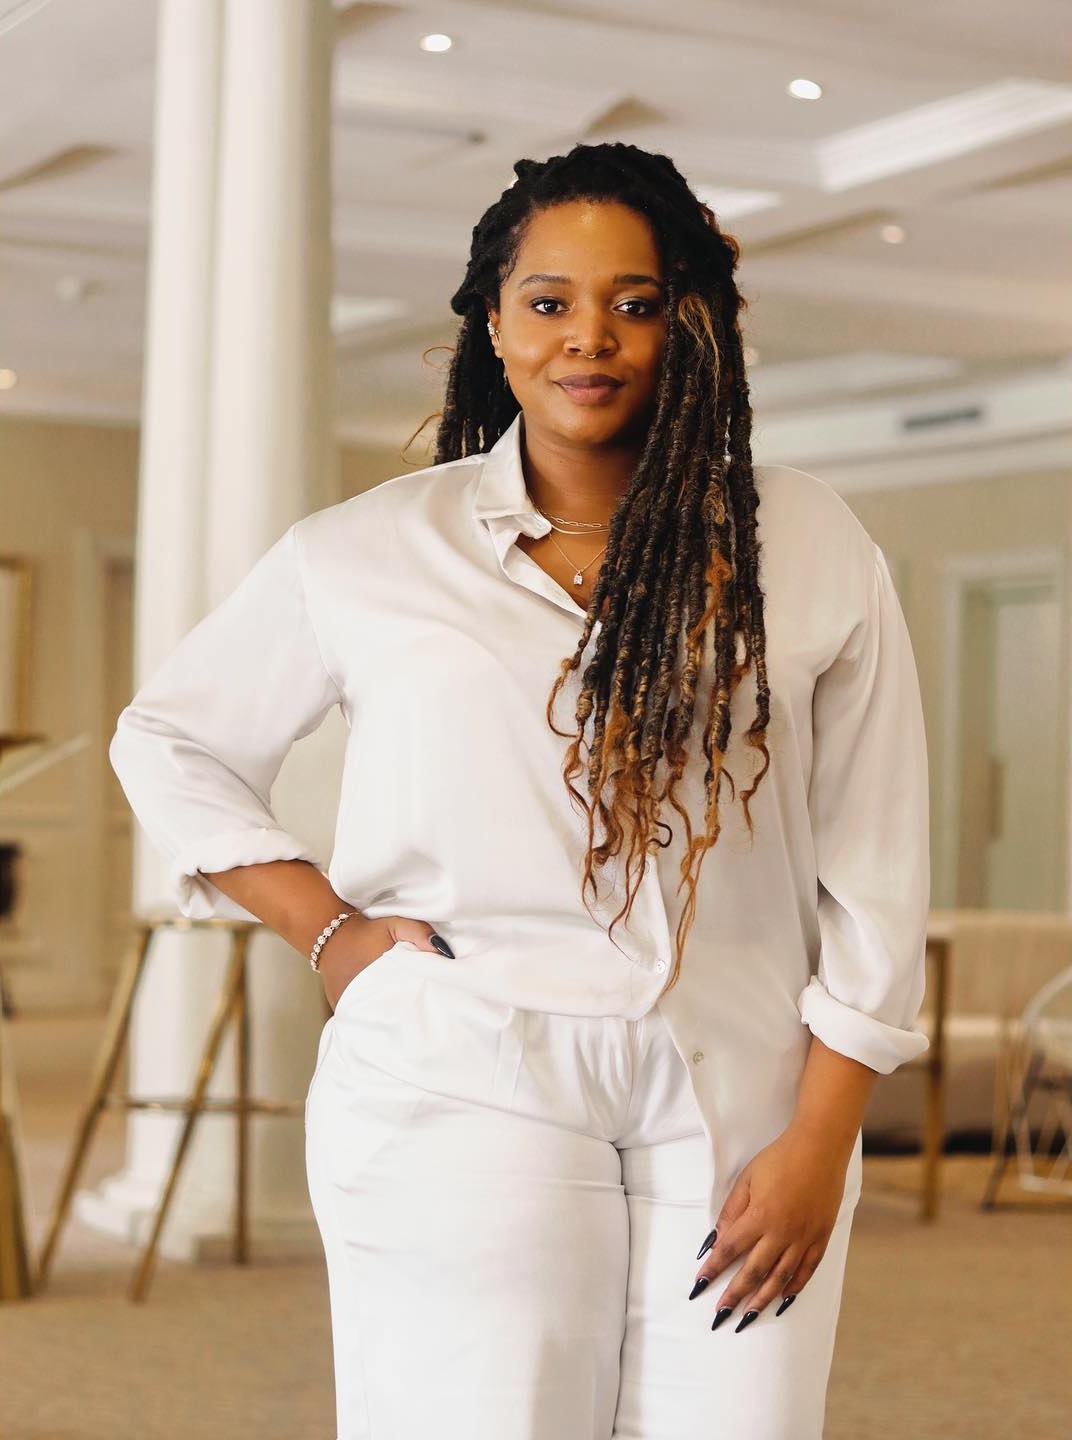 Connie Ferguson’s daughter, Lesedi opens up on being snubbed by casting director for ‘not looking good’